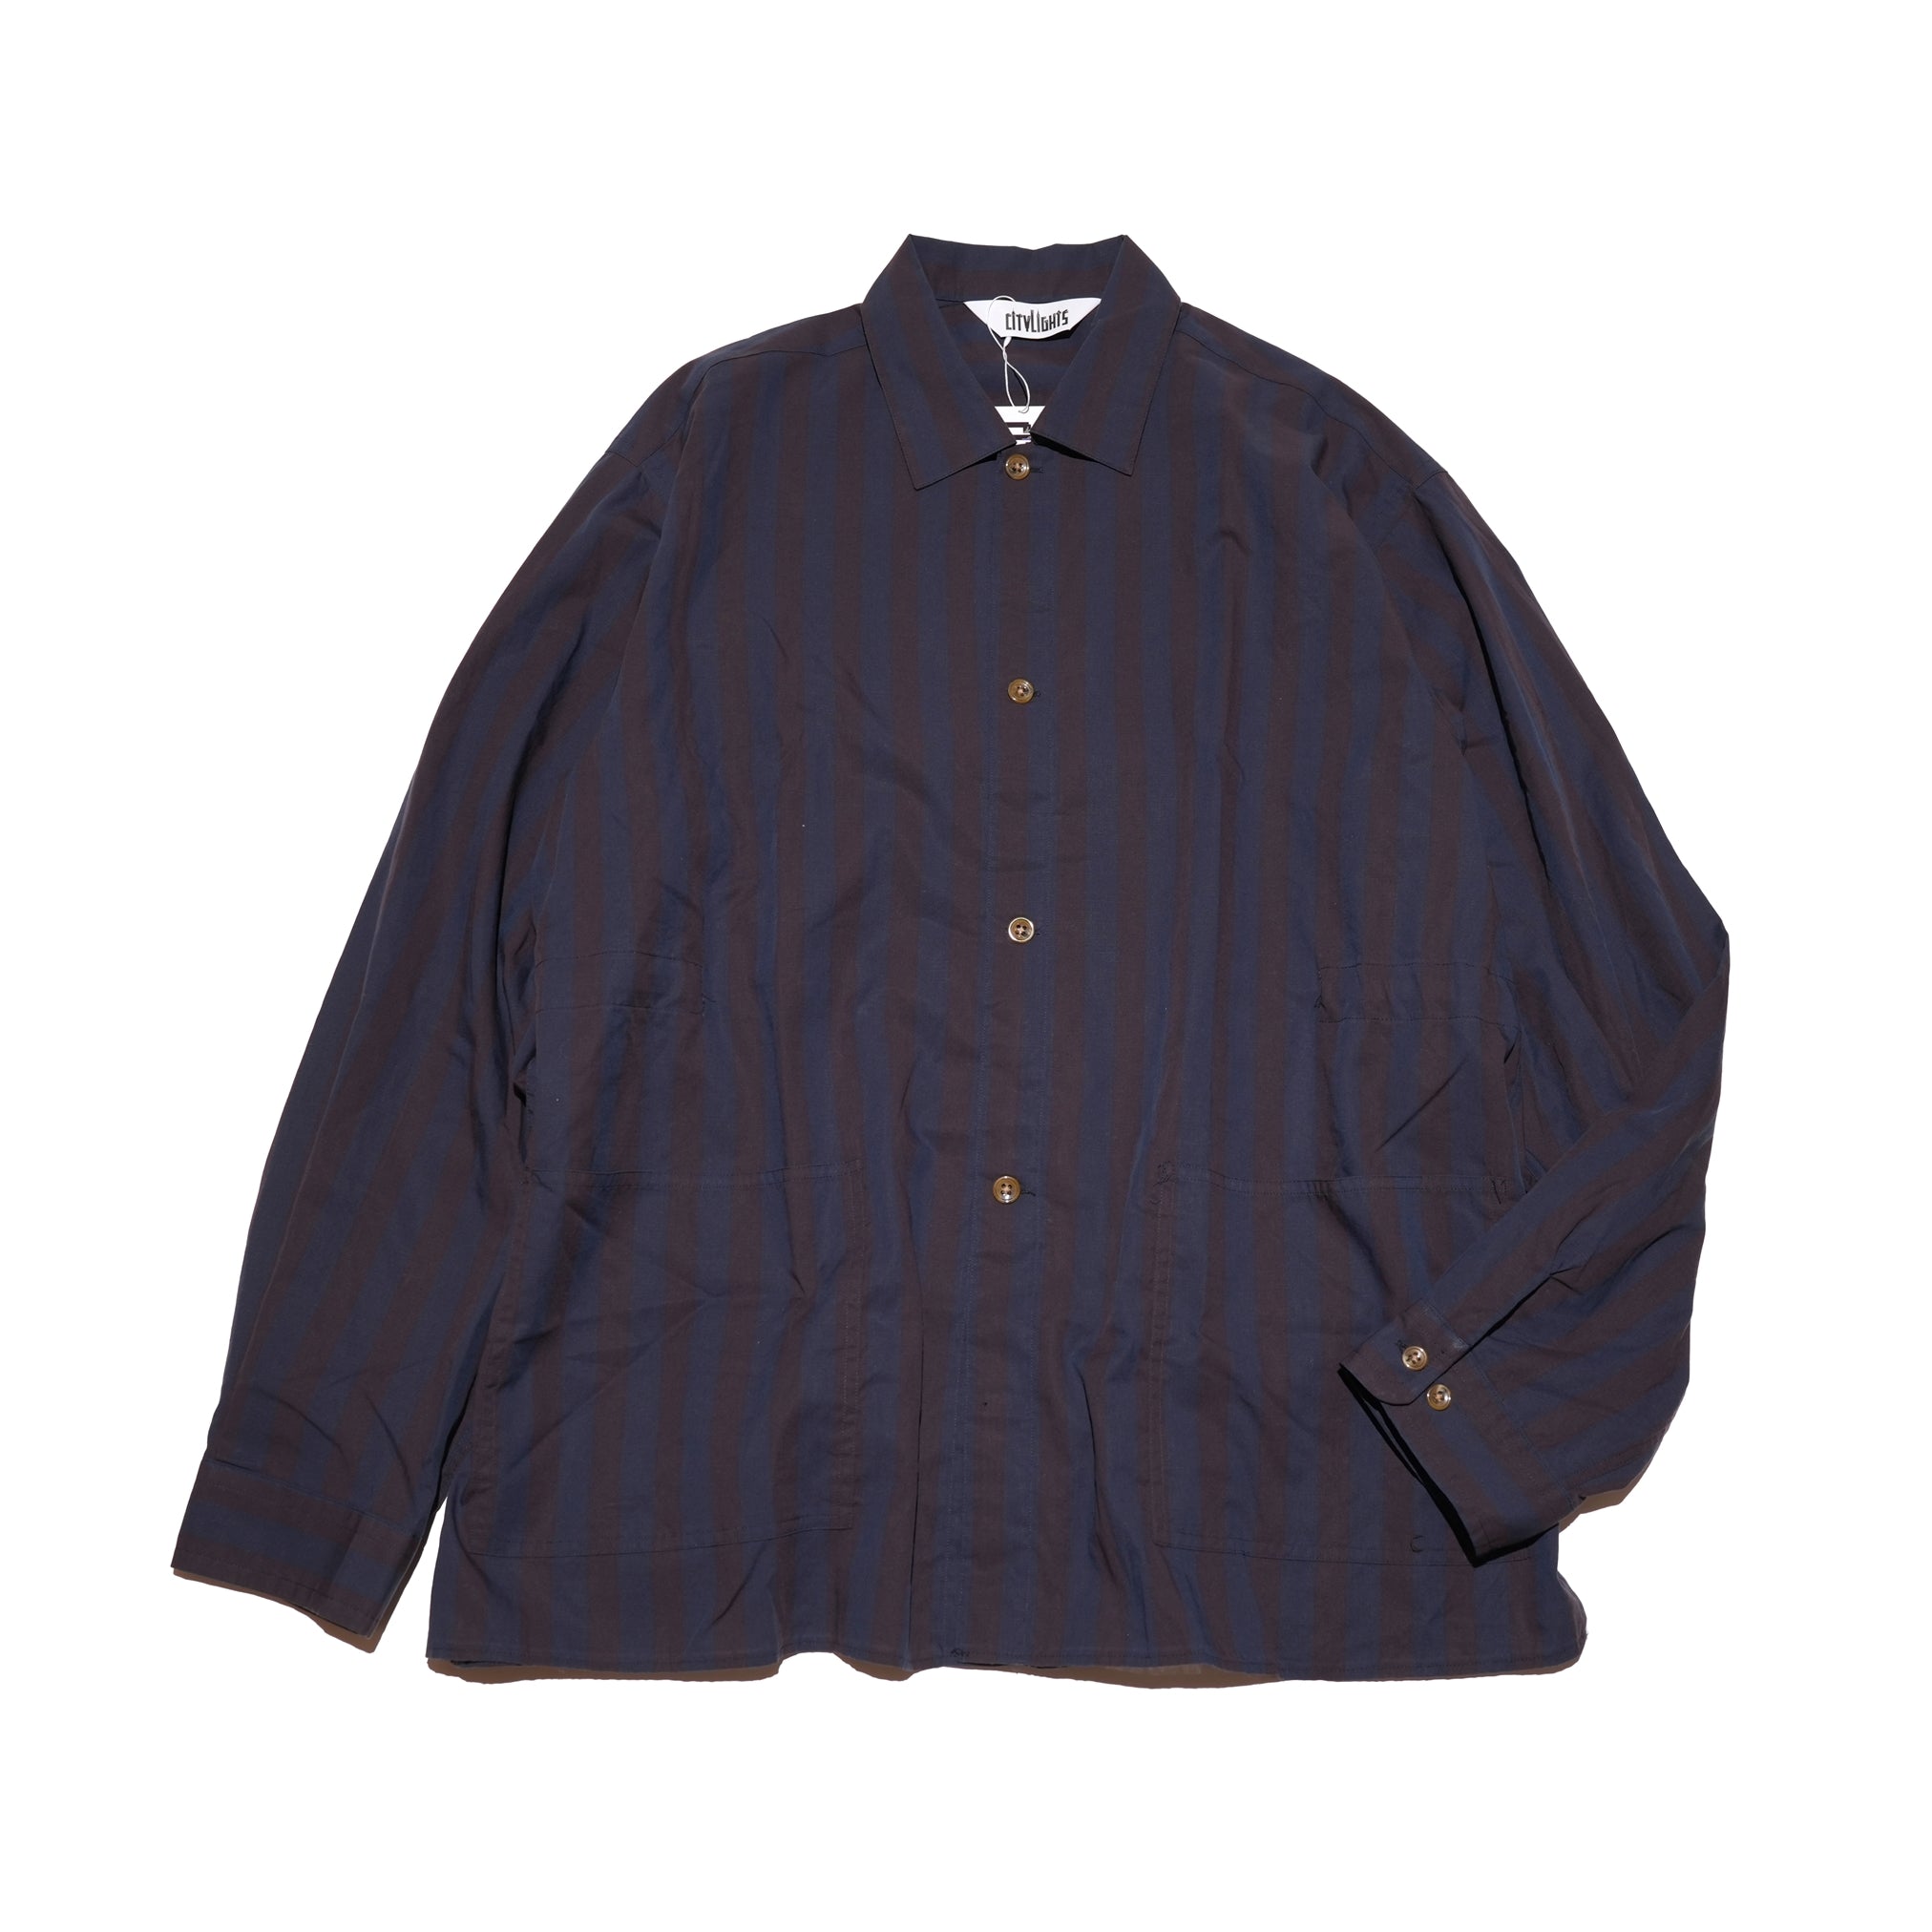 Name: E-Z GOING SHIRTS | Color:Bold Stripe | Size:Regular/Tall 【CITYLIGHTS PRODUCTS_シティライツプロダクツ】